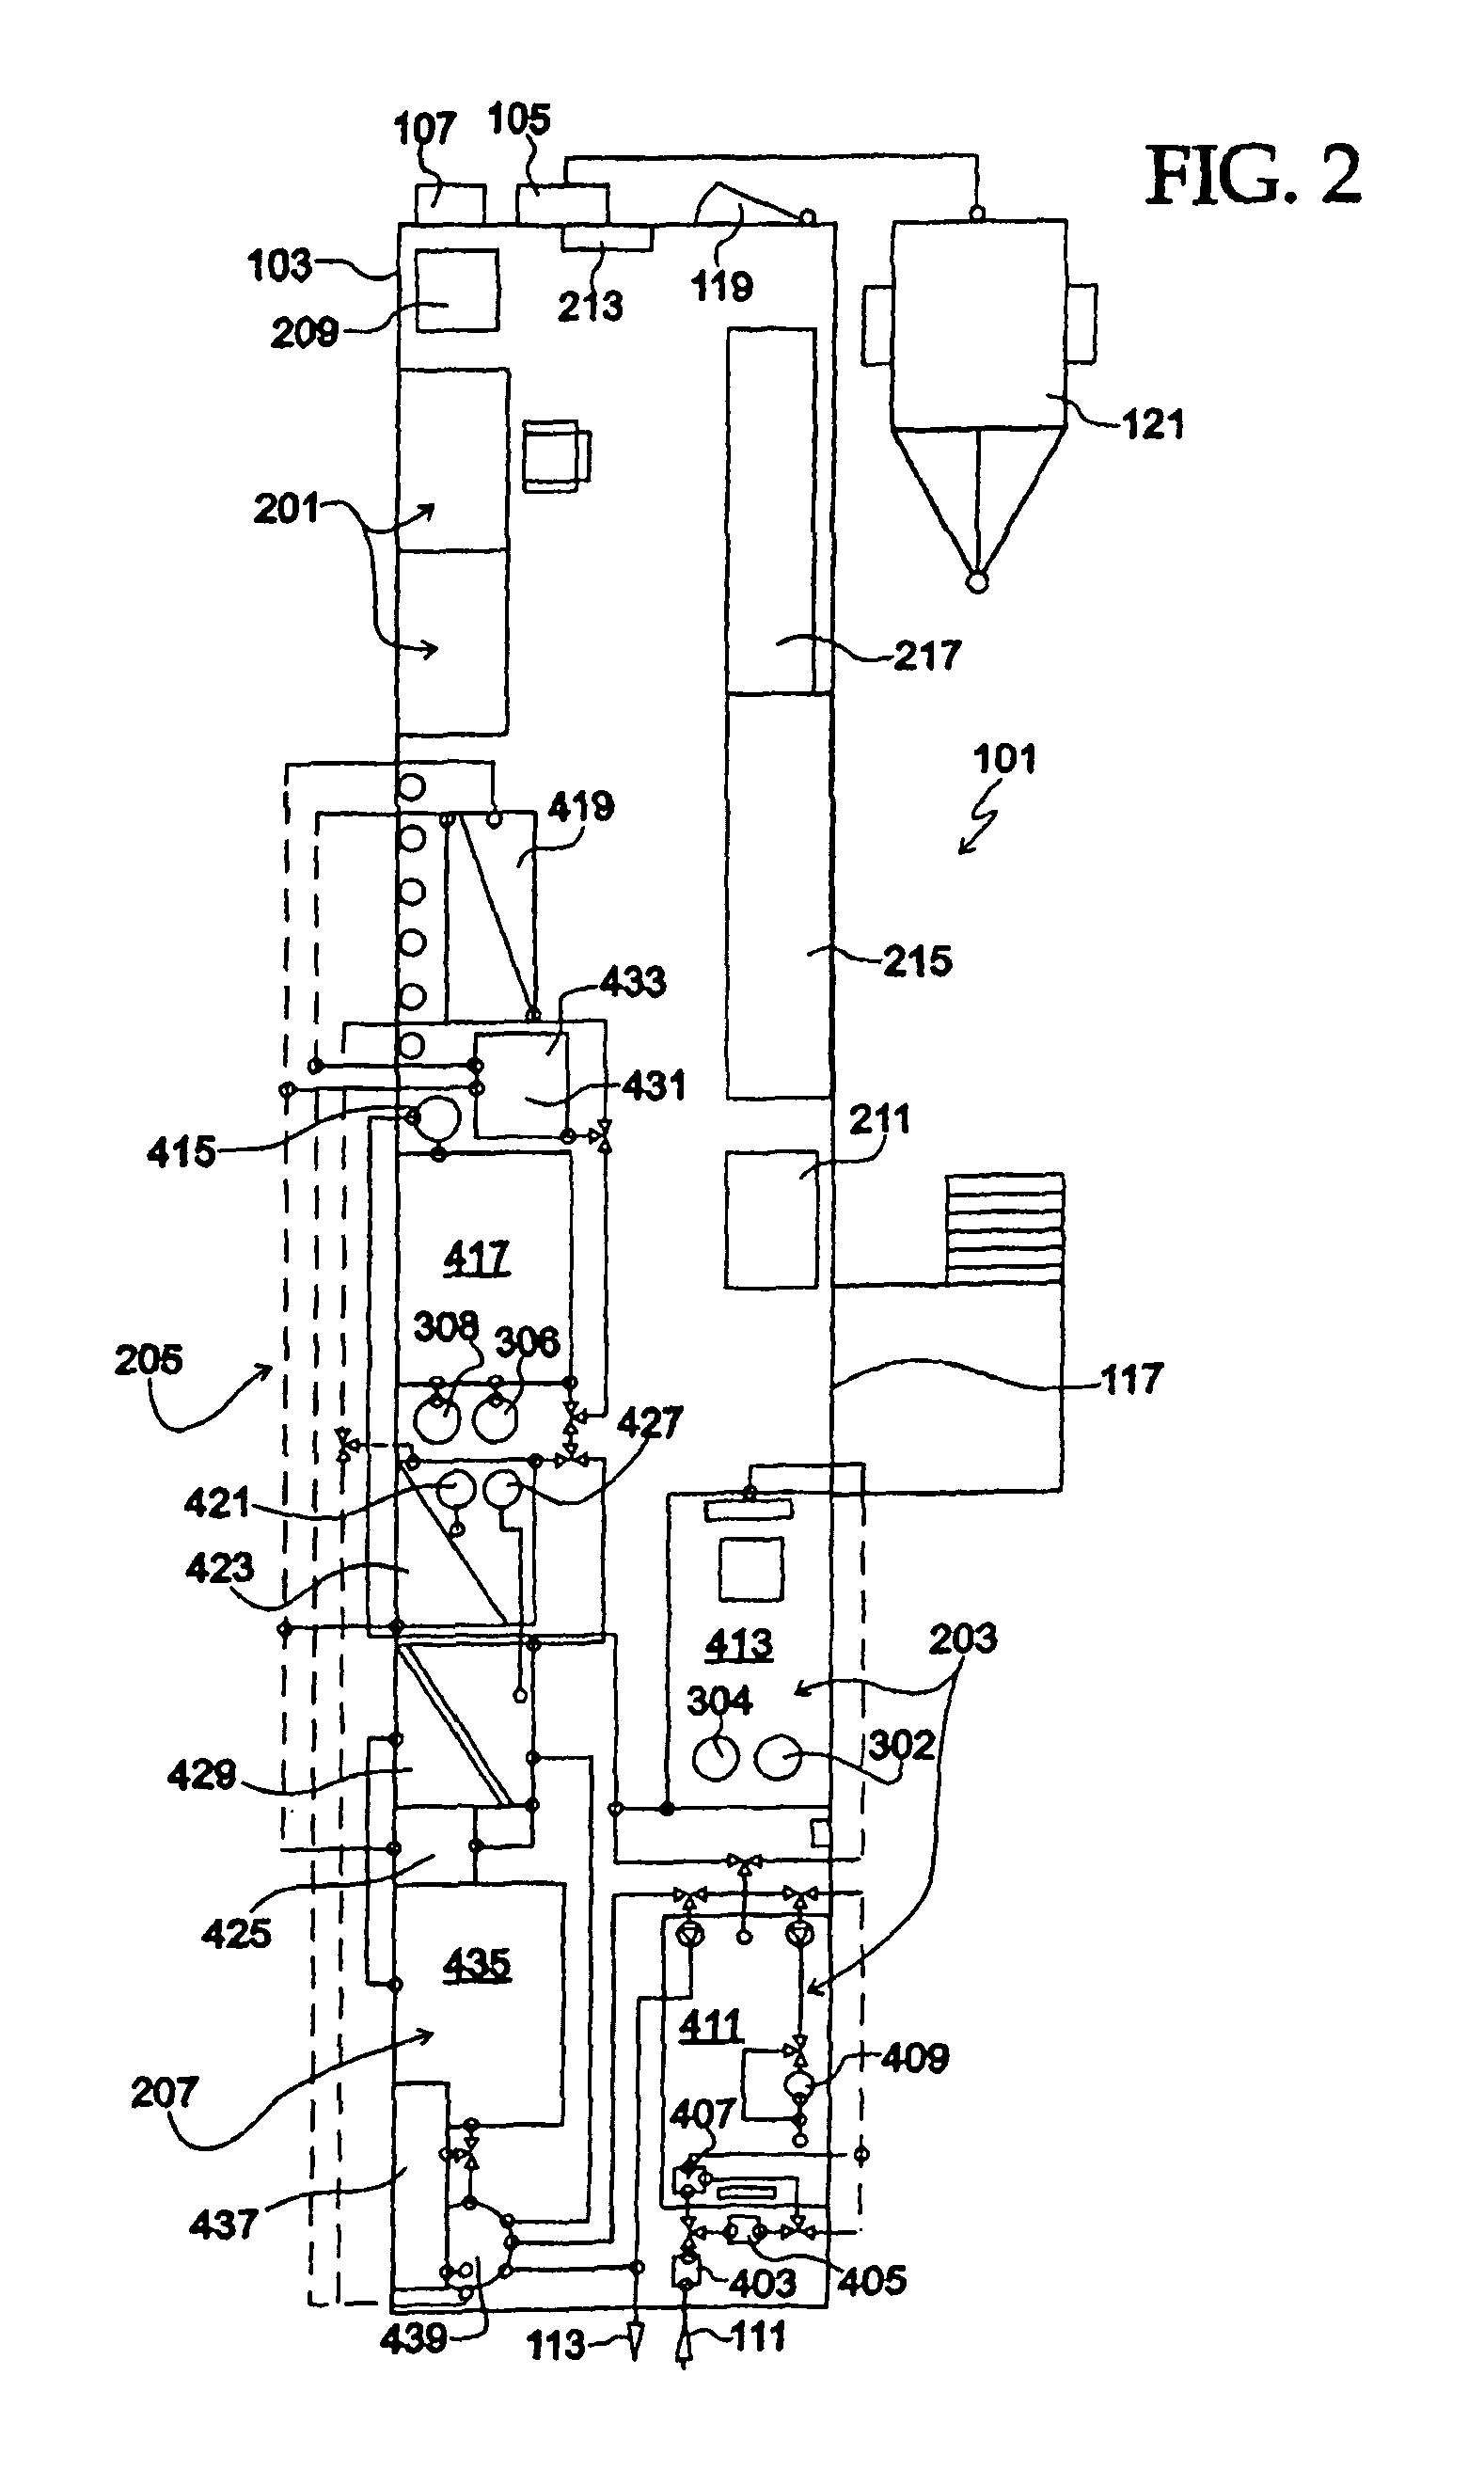 Mobile station and methods for diagnosing and modeling site specific full-scale effluent treatment facility requirements